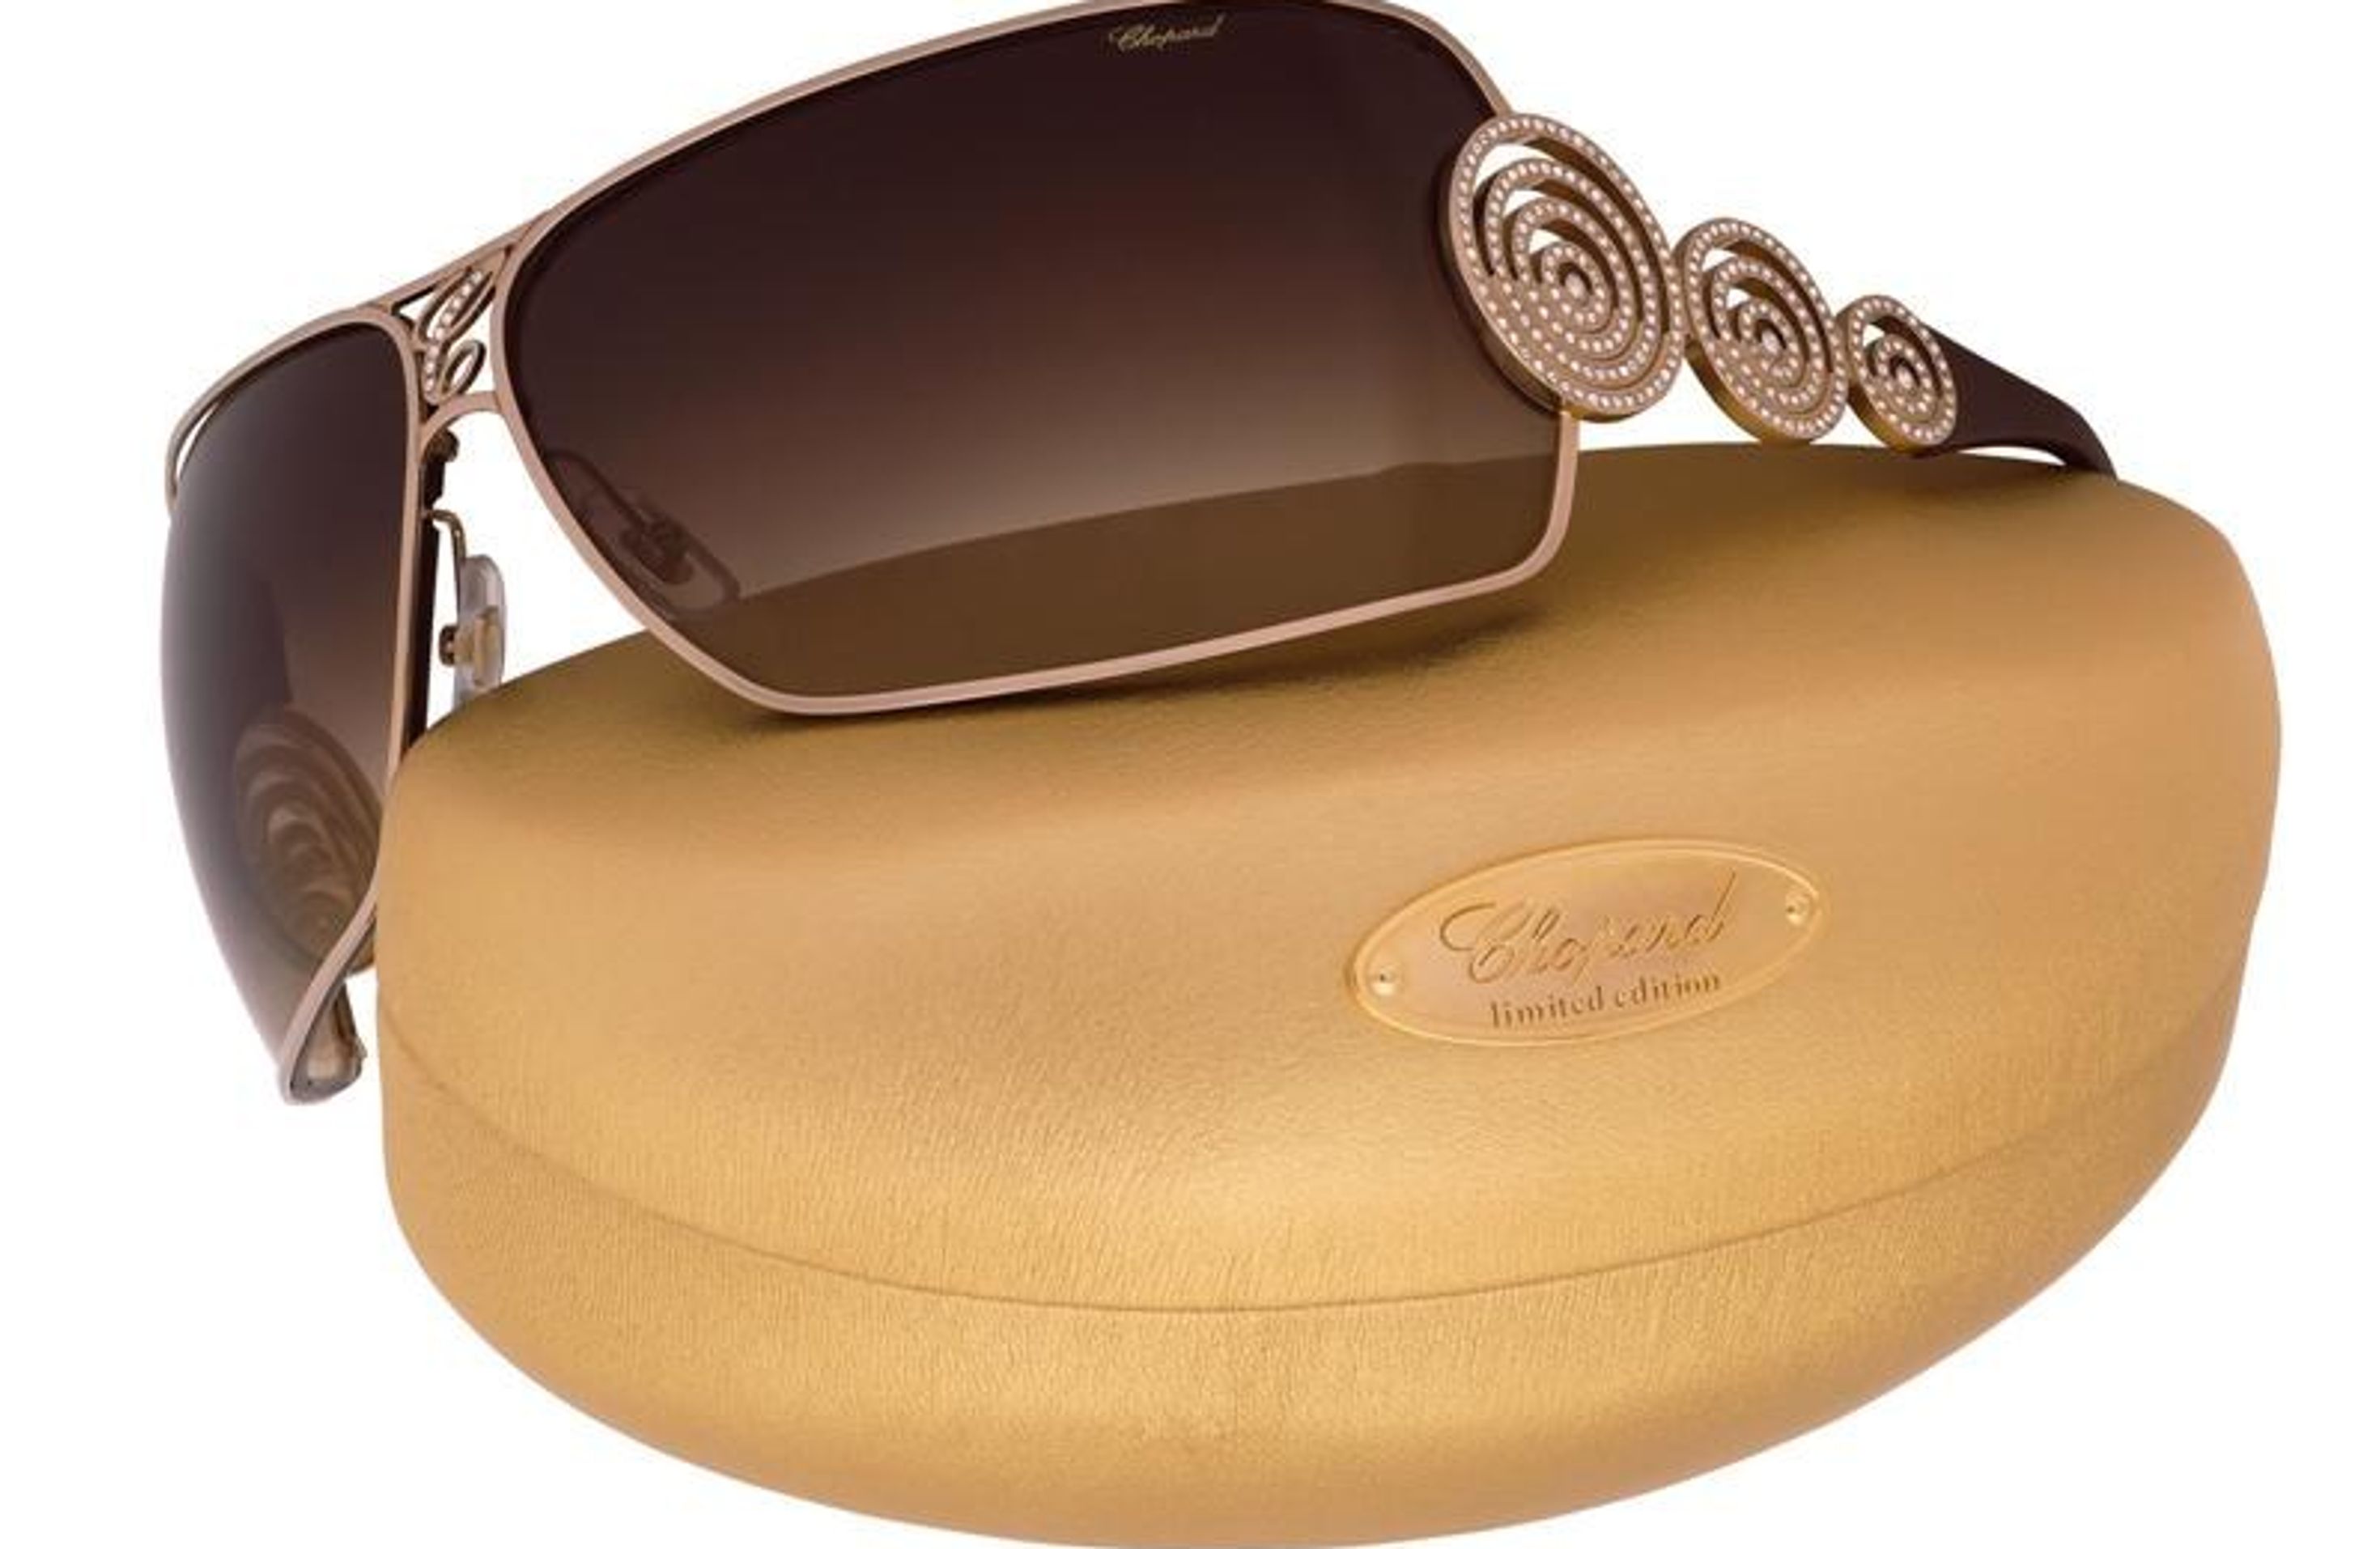 Chopard presents limited edition sunglasses